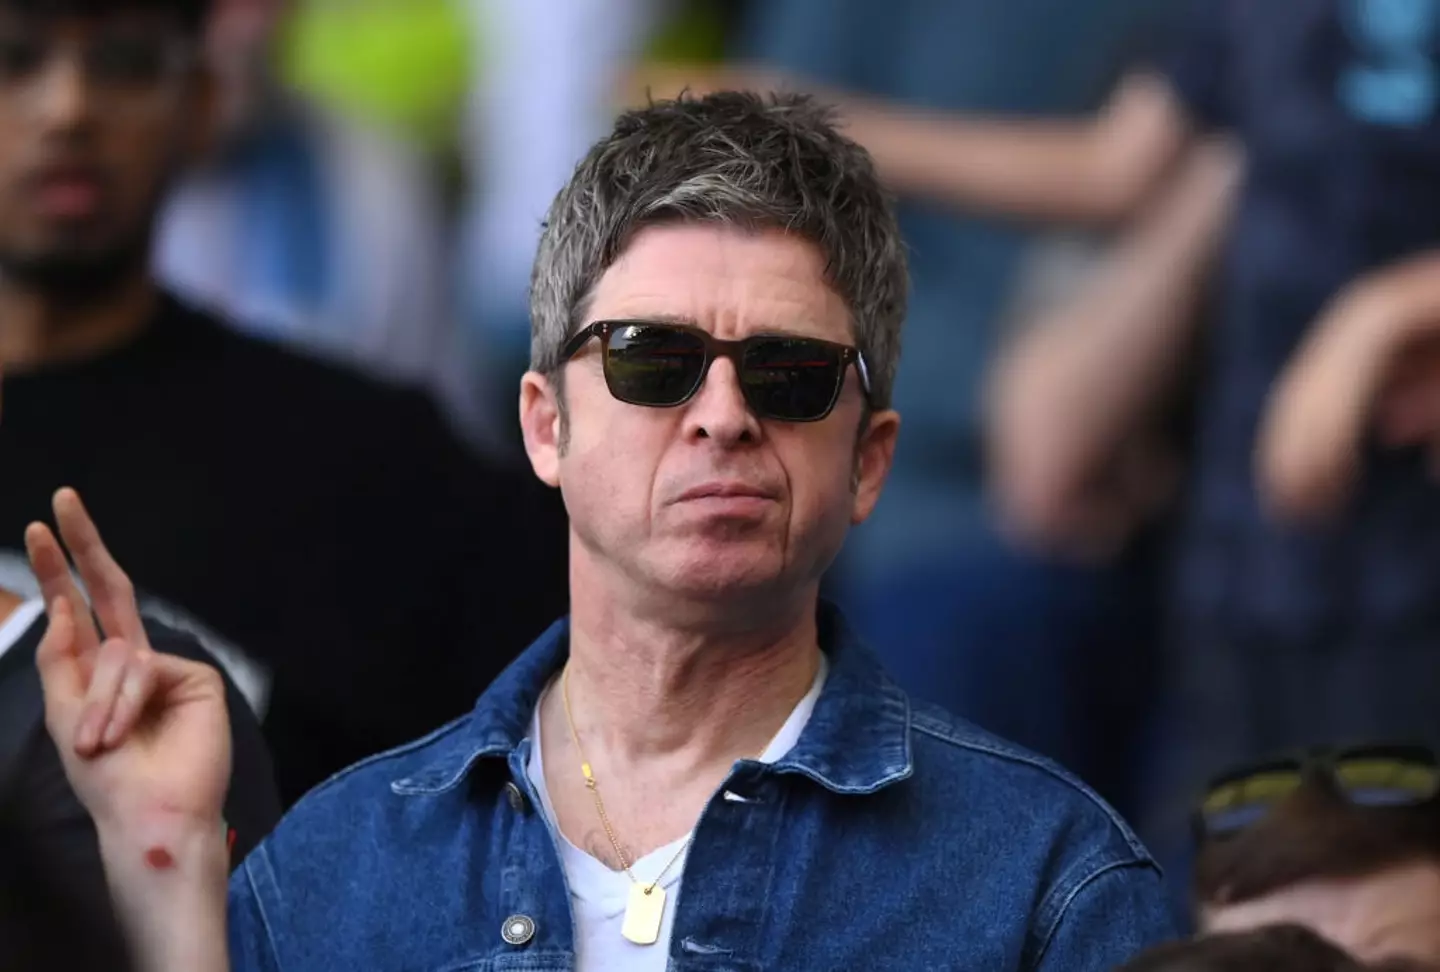 Noel Gallagher has had some thoughts on an Oasis reunion (